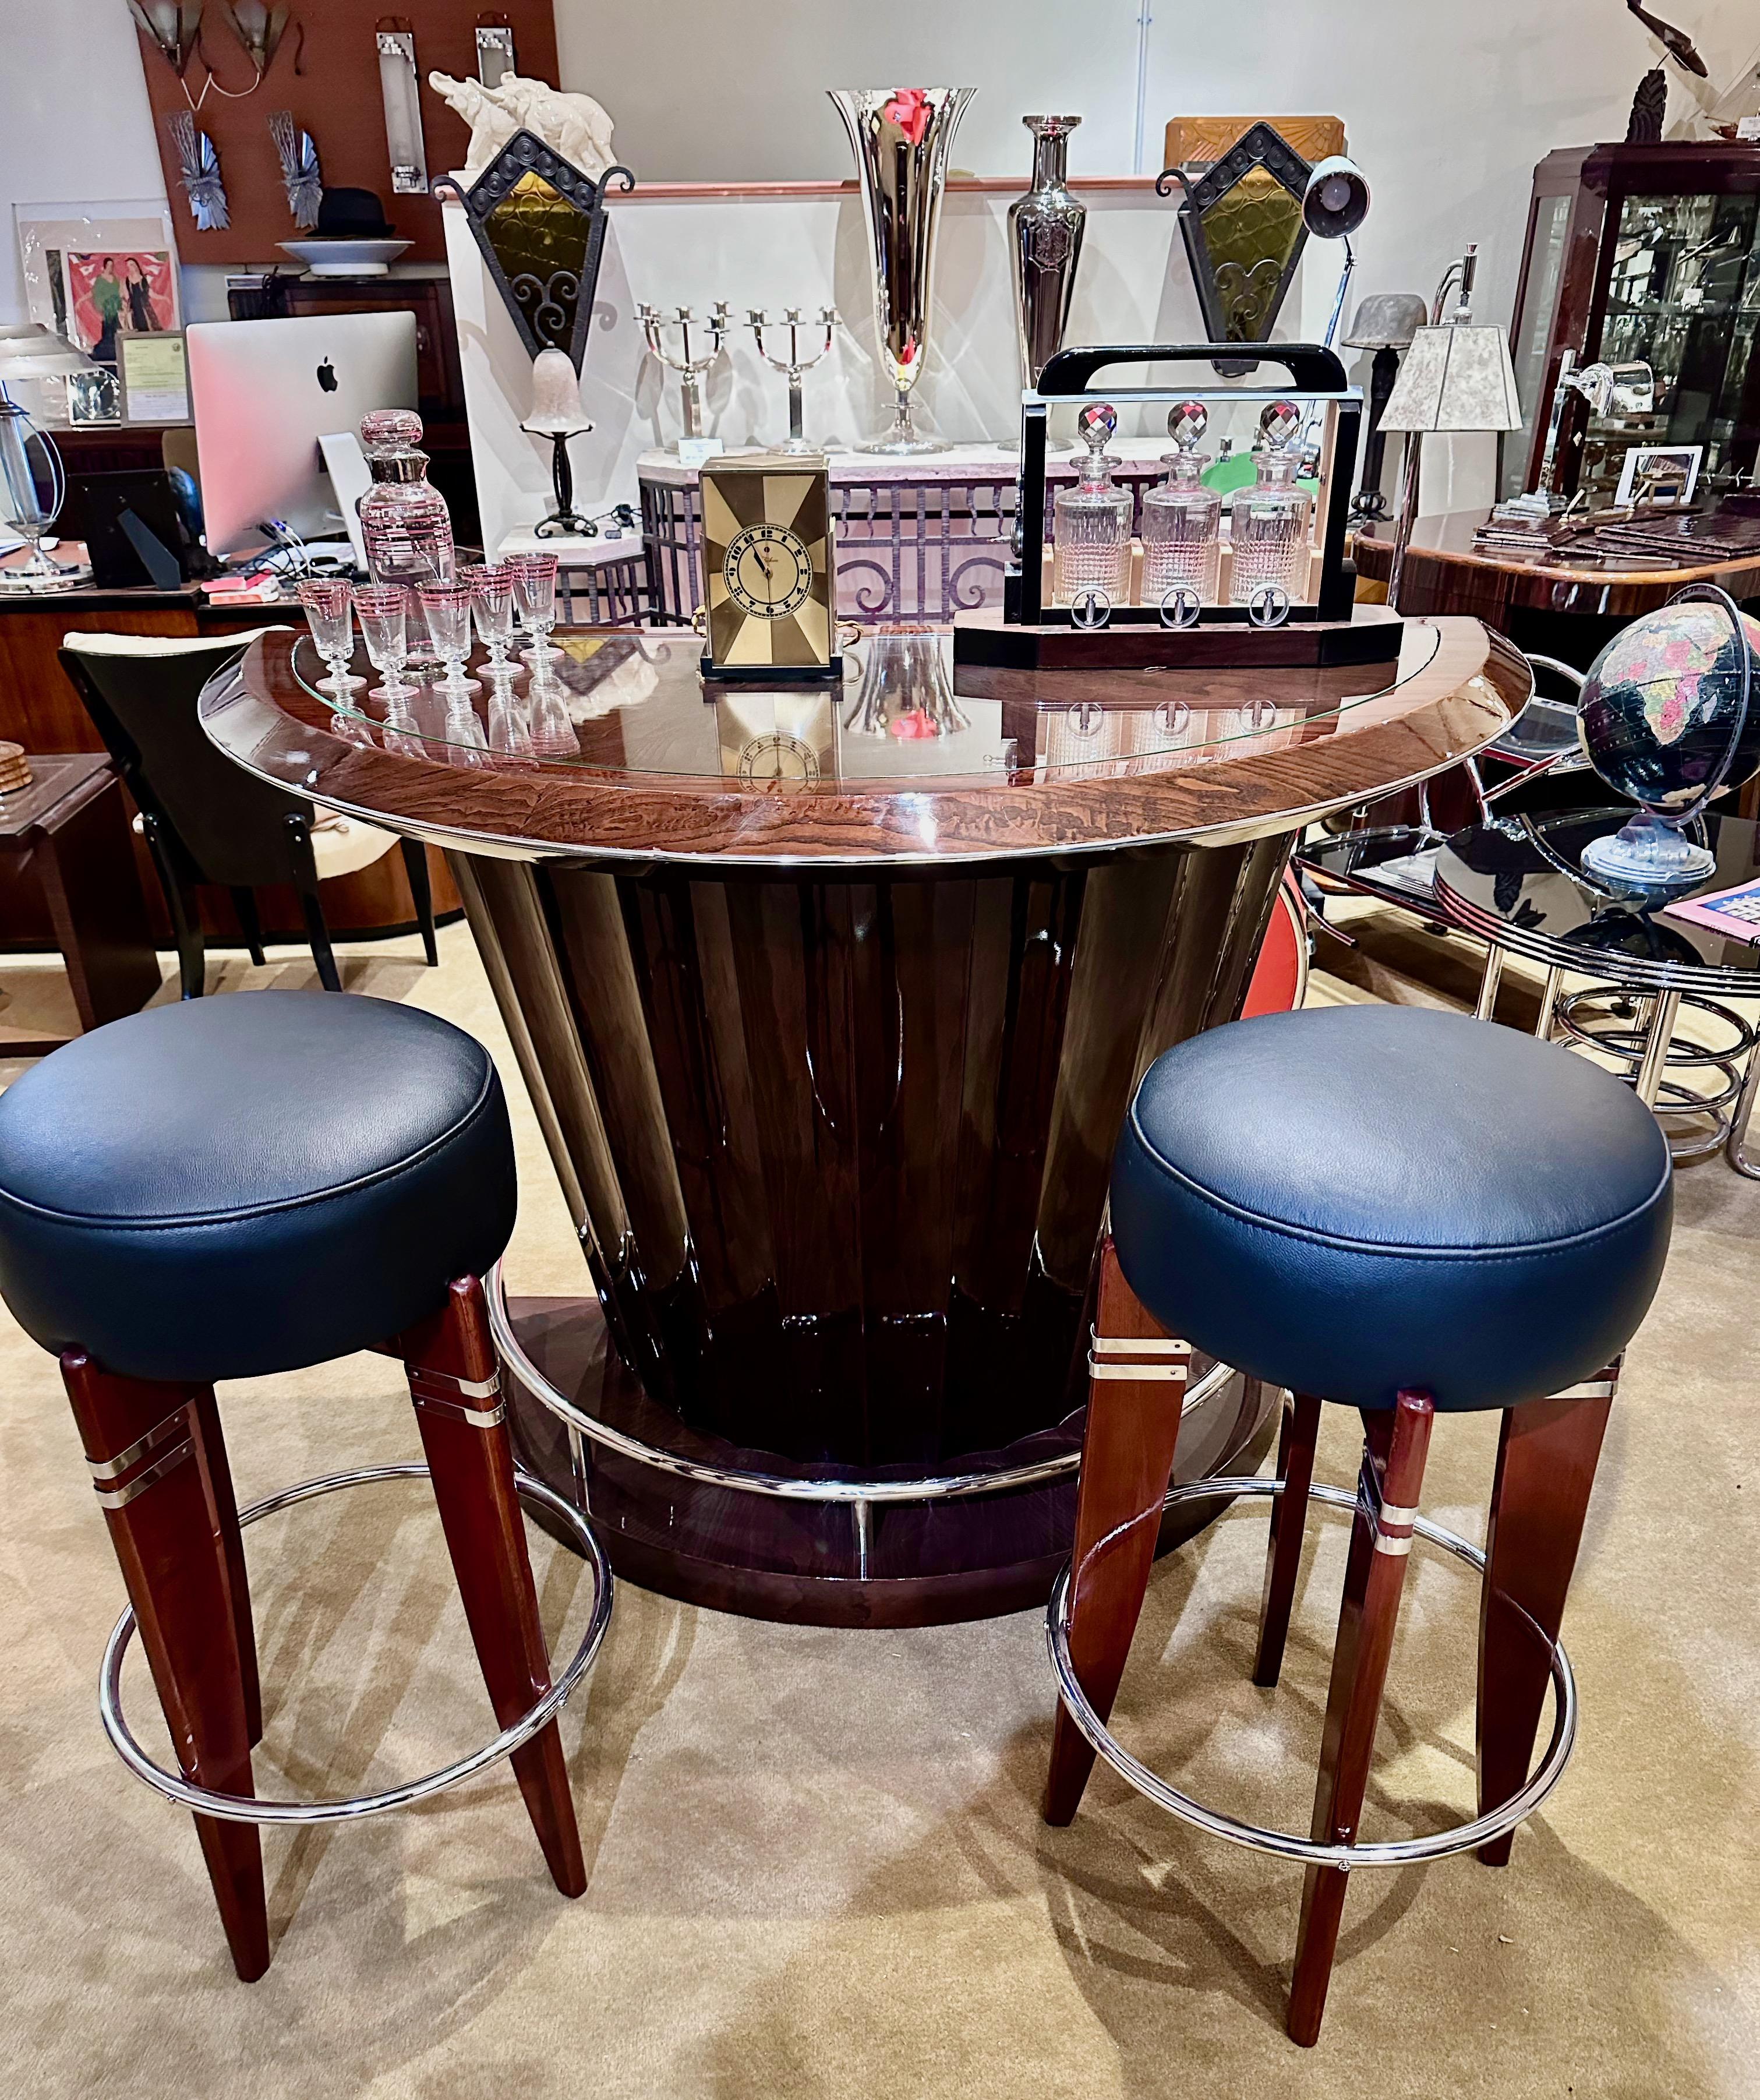 Art Deco Custom Fluted Stand Behind Bar with Chrome. Custom made in Italy, this is from the Giorgio Collection. Dark walnut wood, hand-finished with a stunning European patina. This newly made custom design would be great for your home bar, man